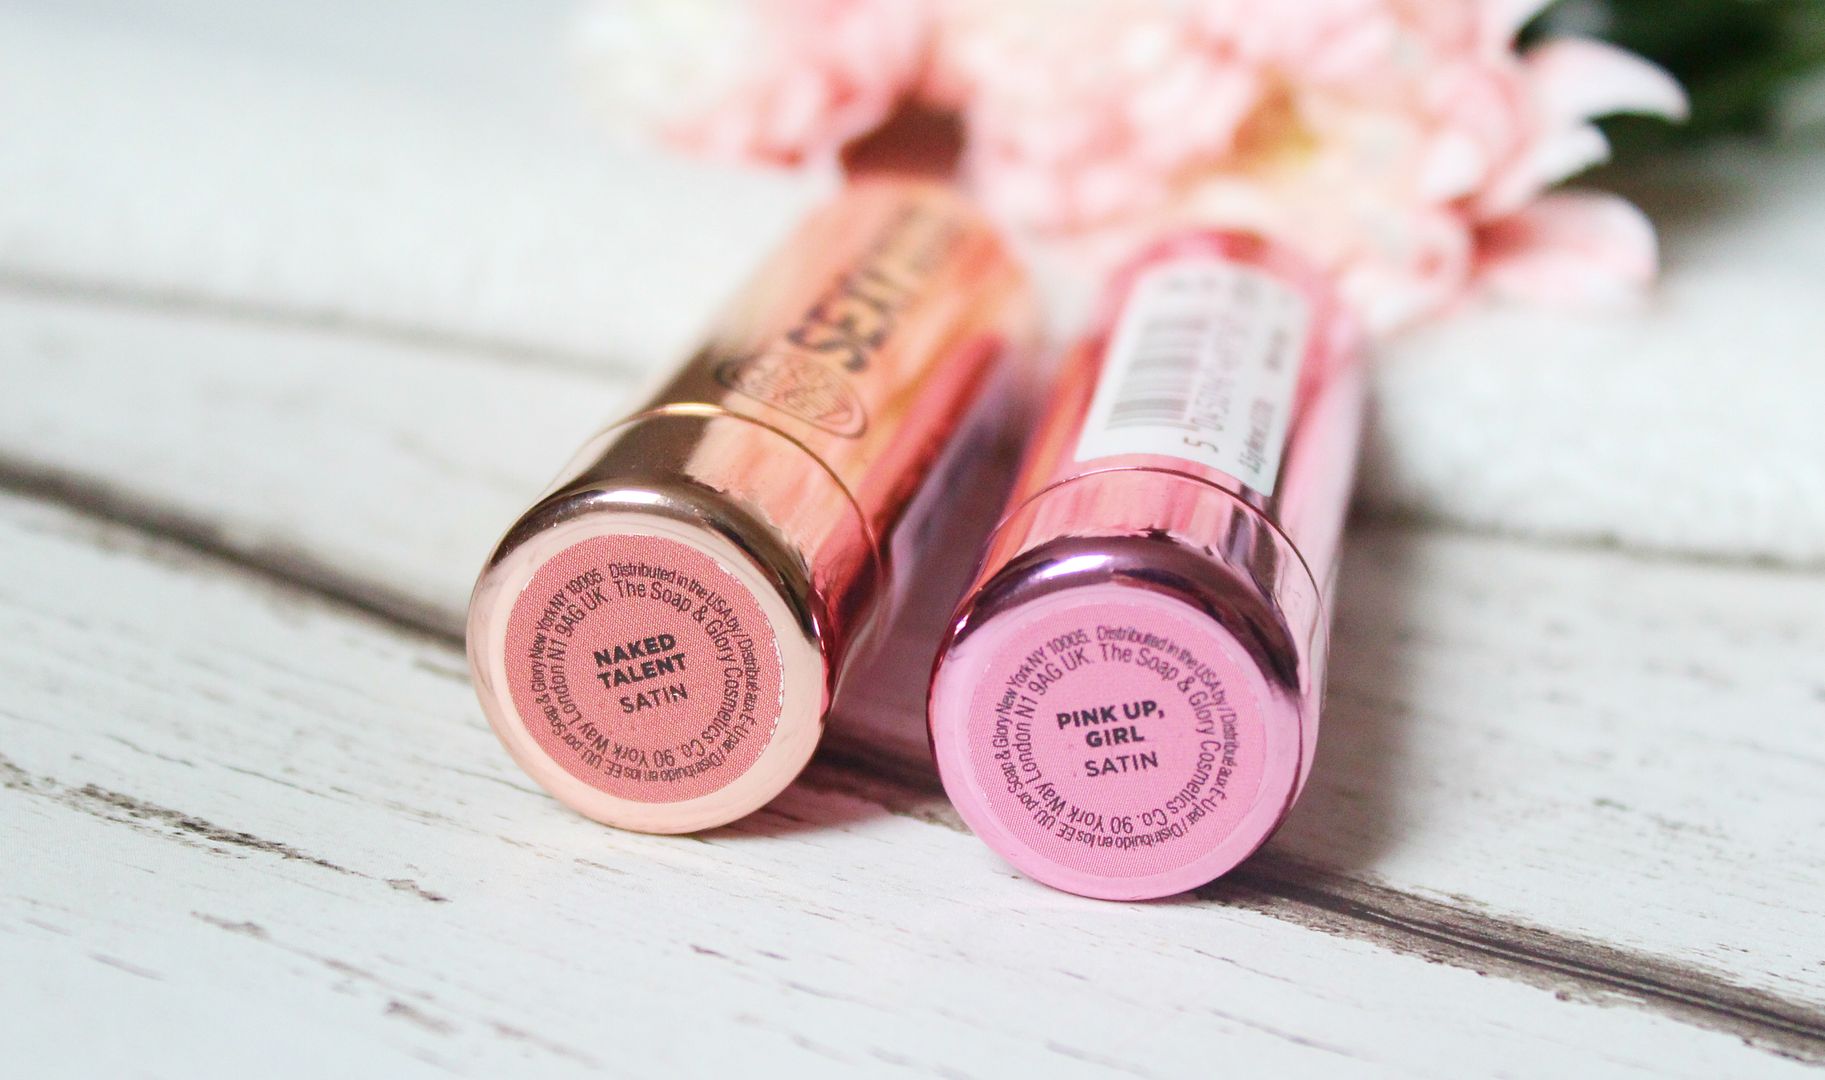 New Soap And Glory Sexy Mother Pucker Lipsticks Nude Pink Naked Talent Pink Up Girl Satin Finish Review Belle-Amie UK Beauty Fashion Lifestyle Blog